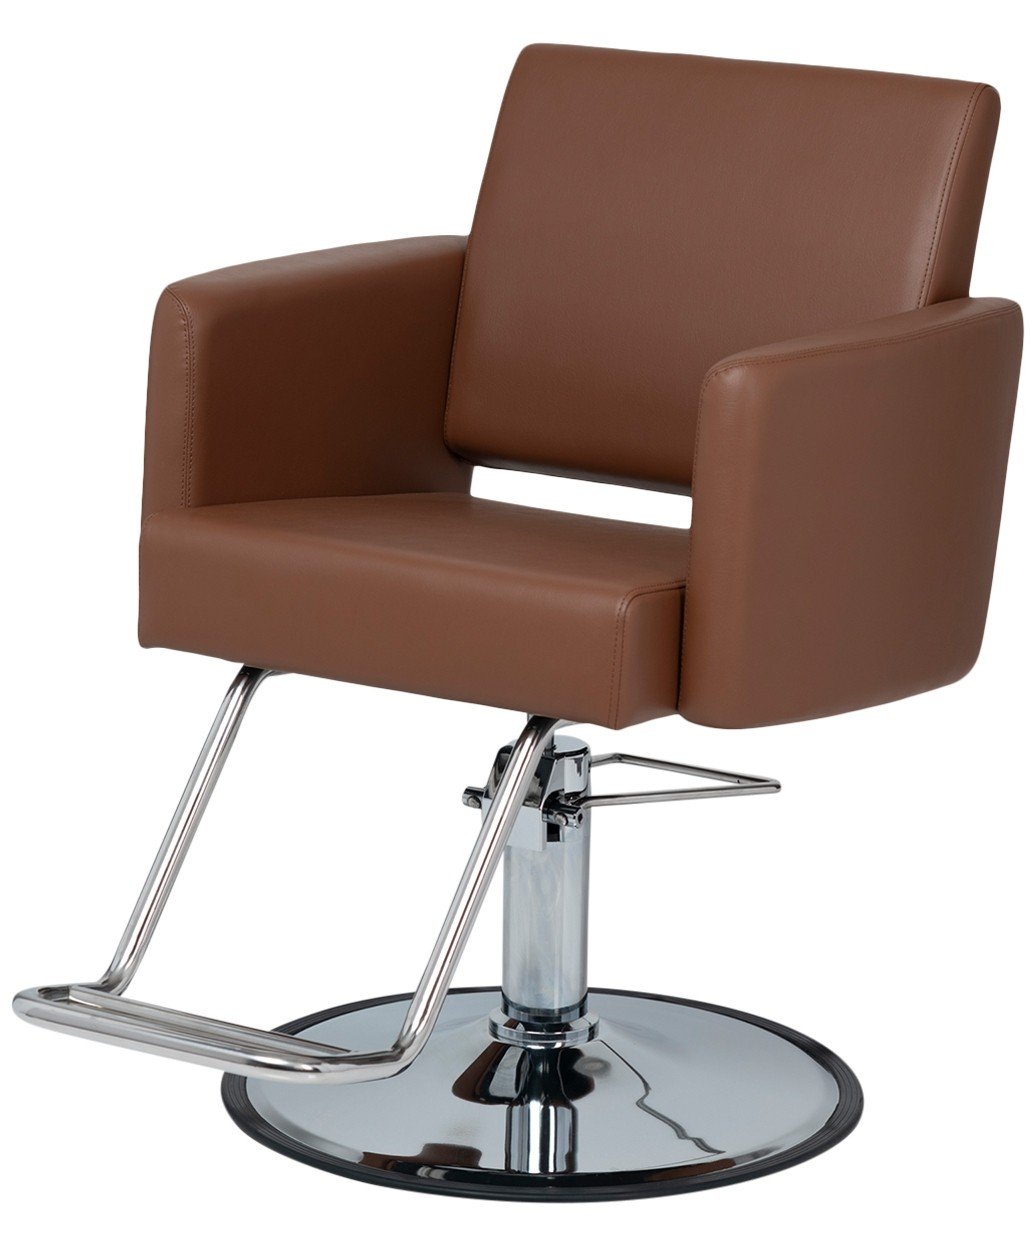 Cammelo Styling Chair